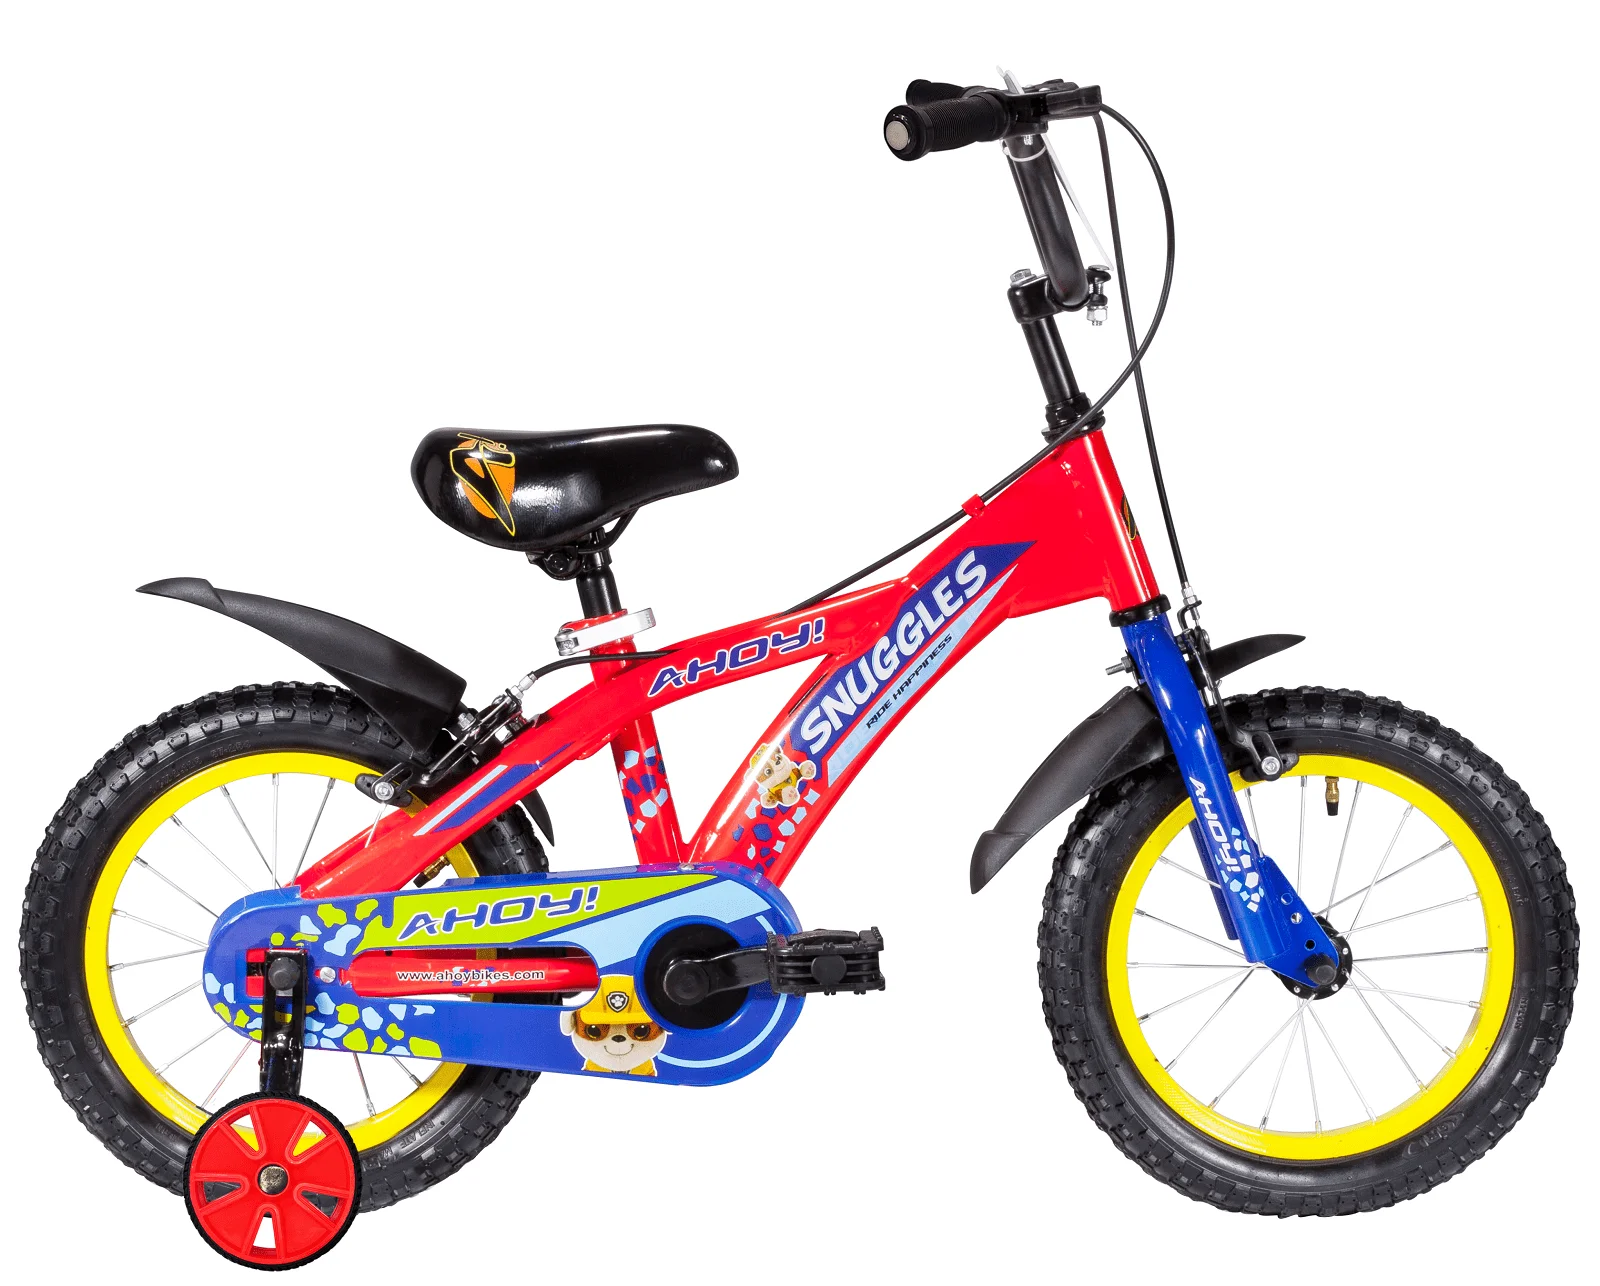 Snuggles Kids Bike Single Speed 14T | Buy Red Cycle Non Gear for Girls